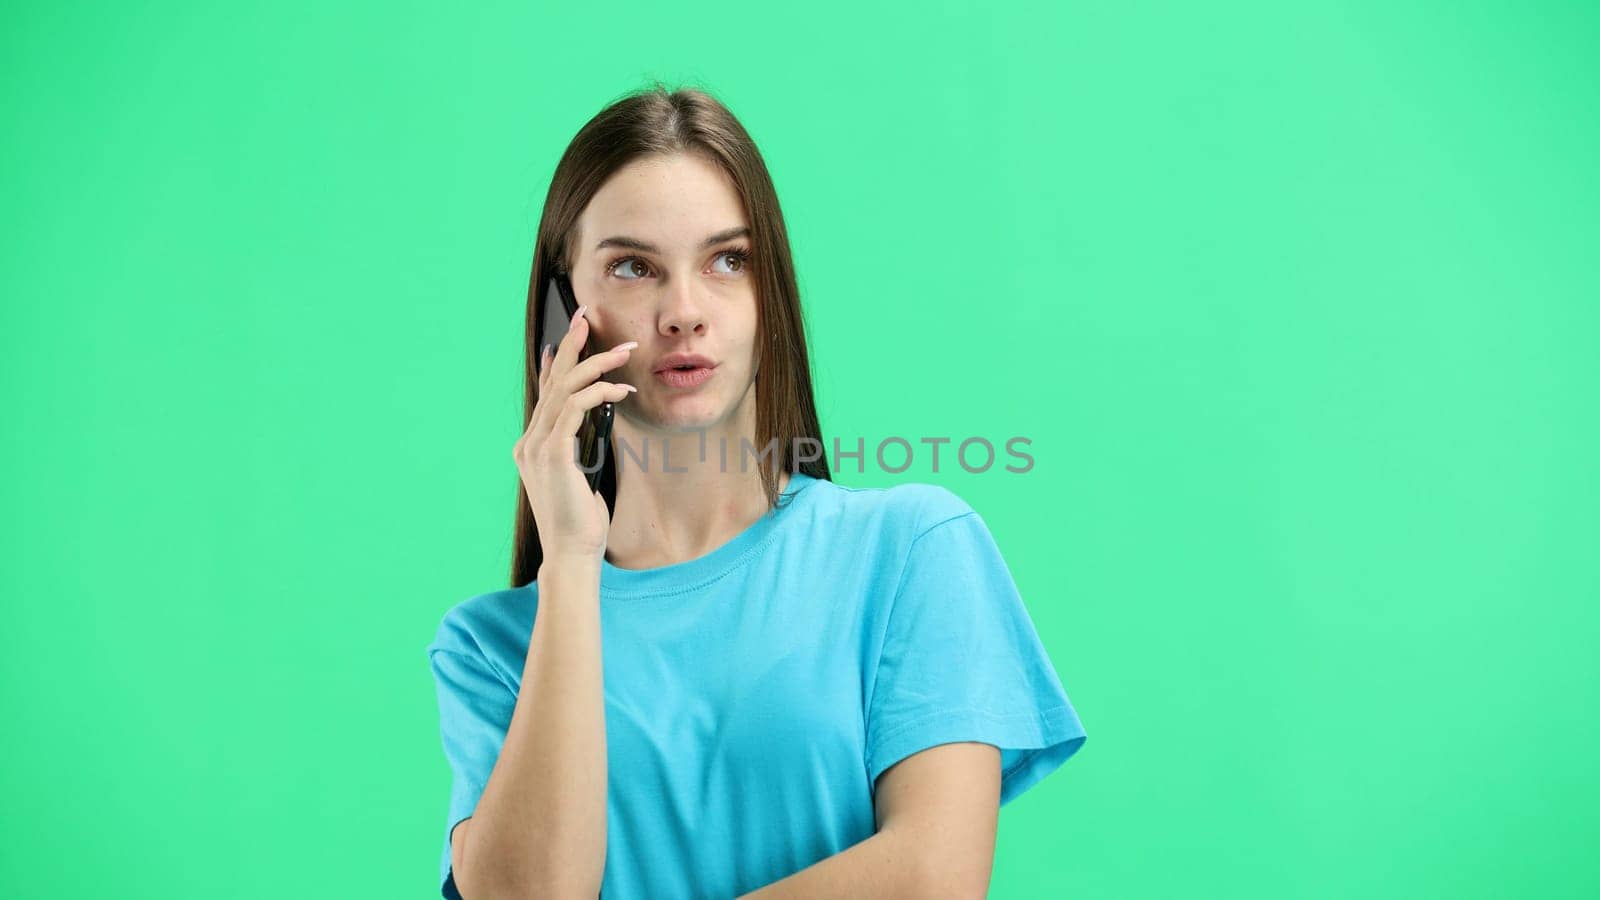 A woman, close-up, on a green background, talking on the phone.